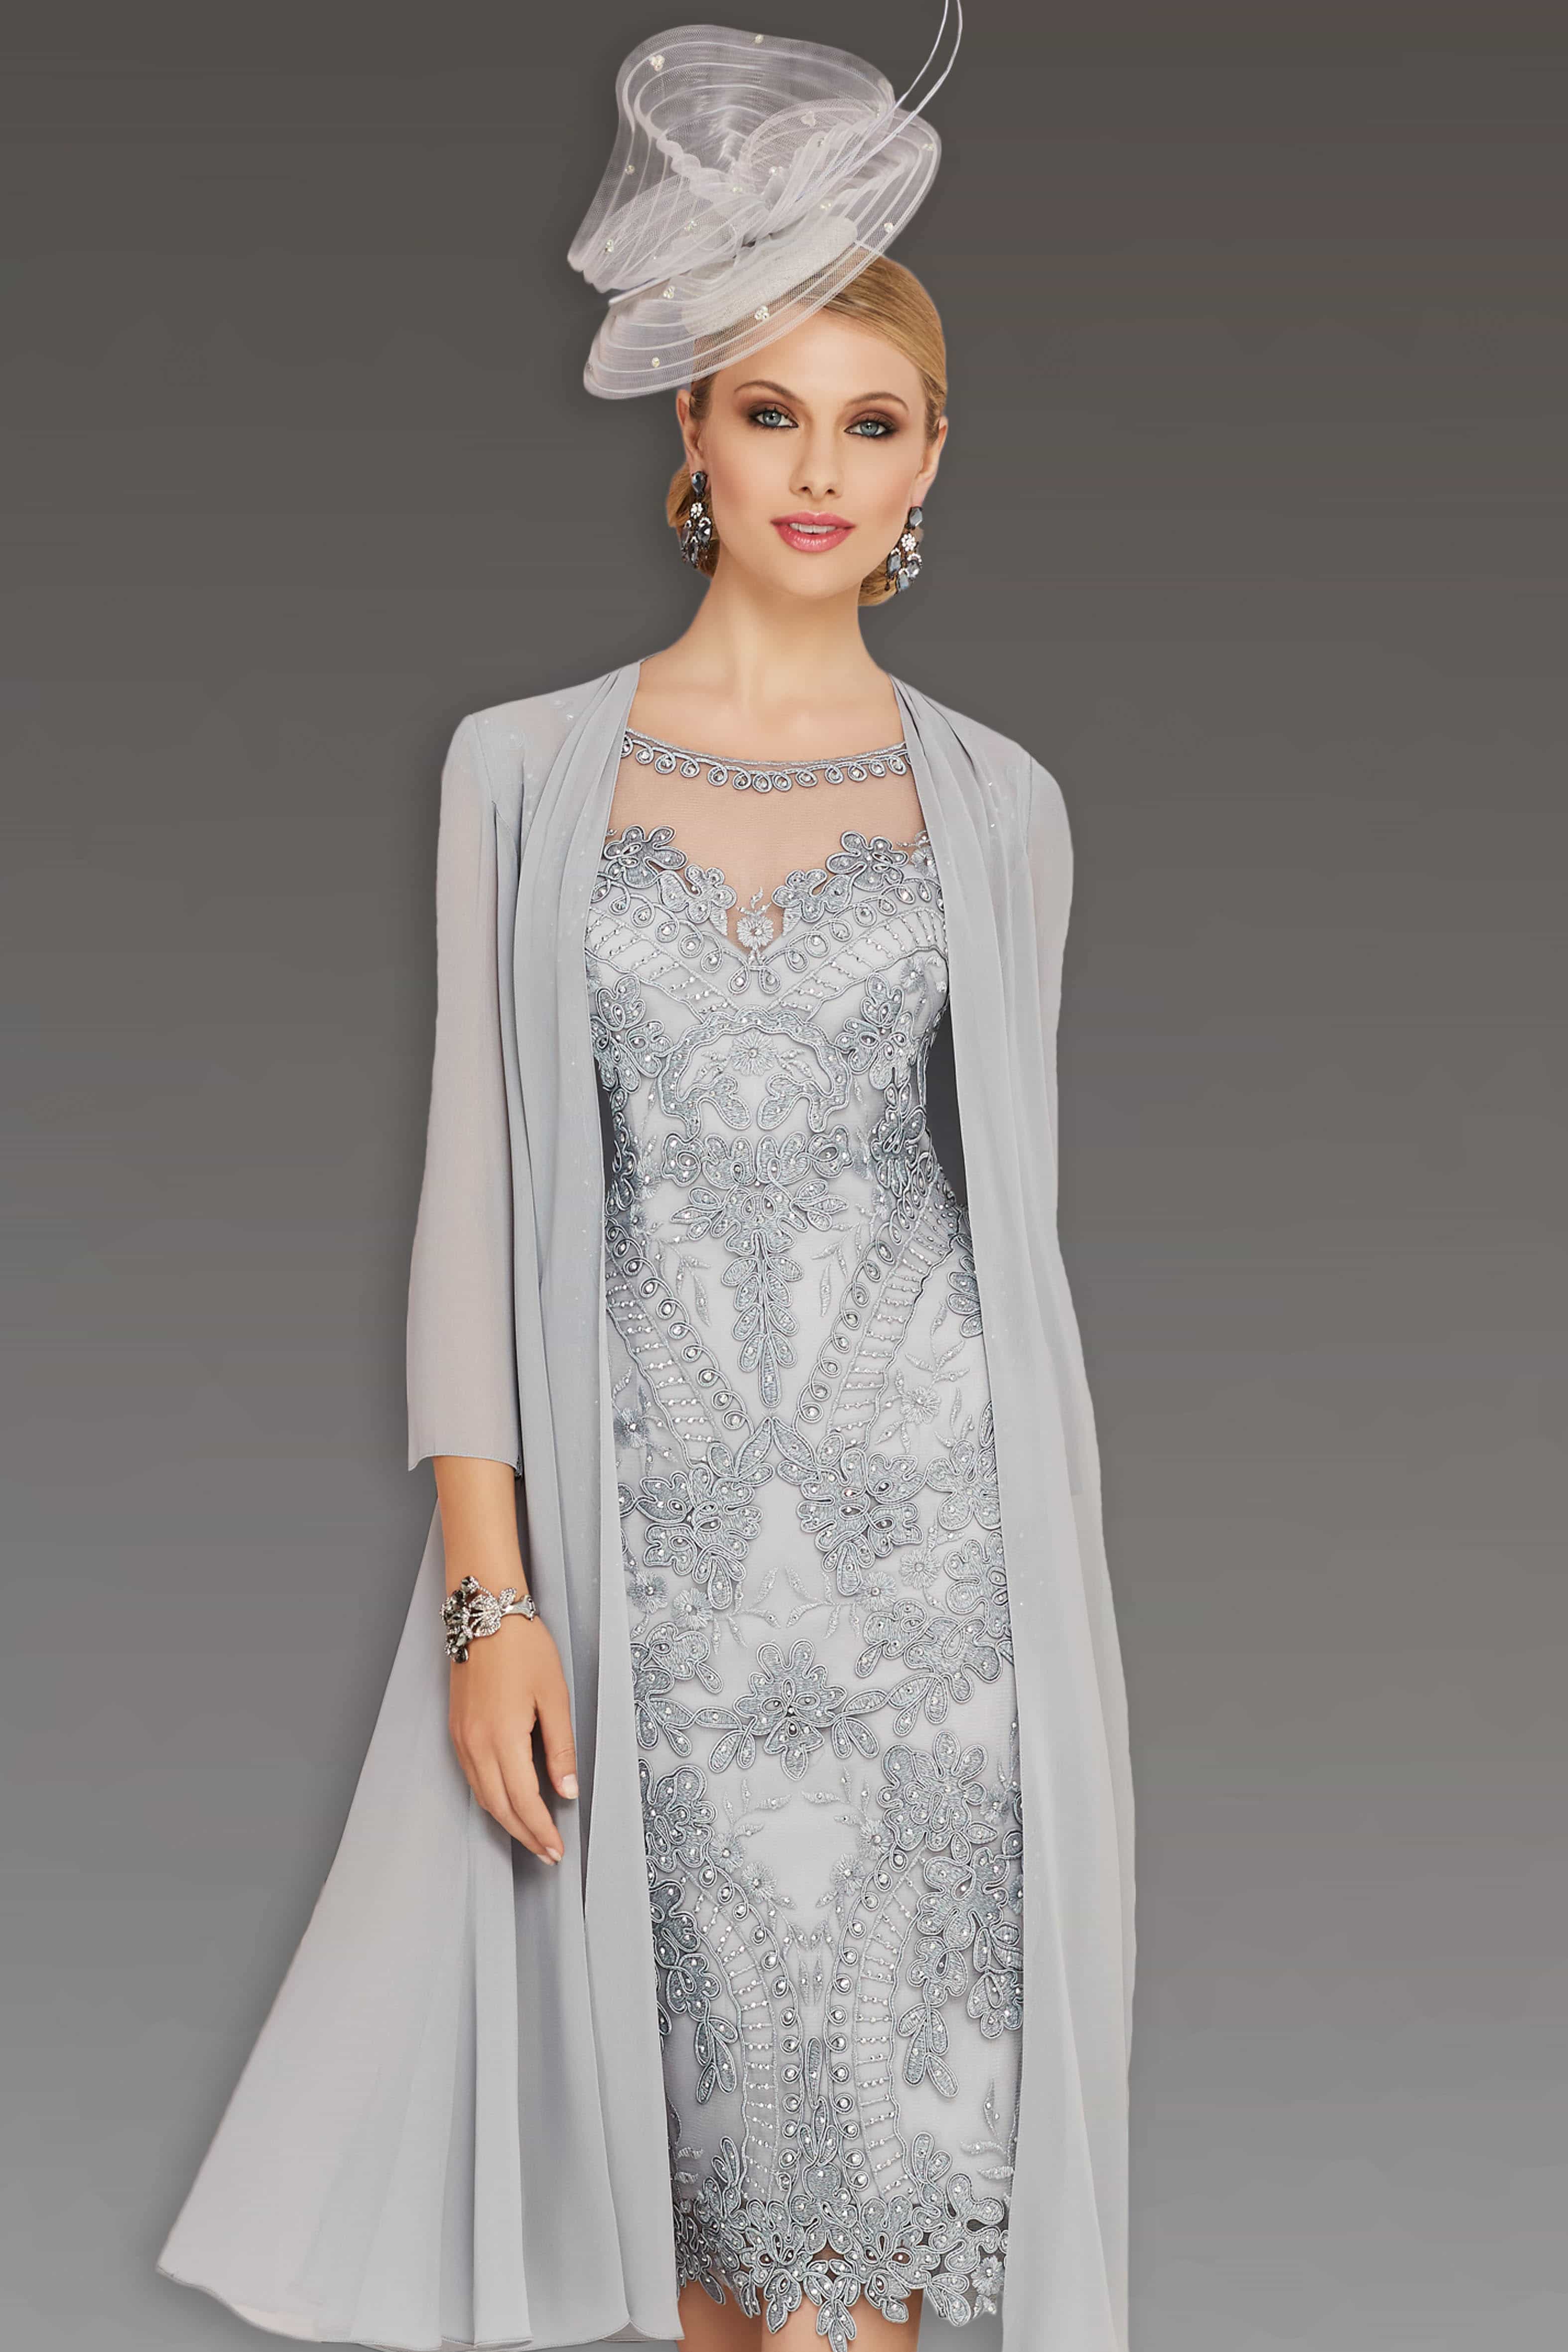 Short lace dress with matching chiffon coat.    Catherines of